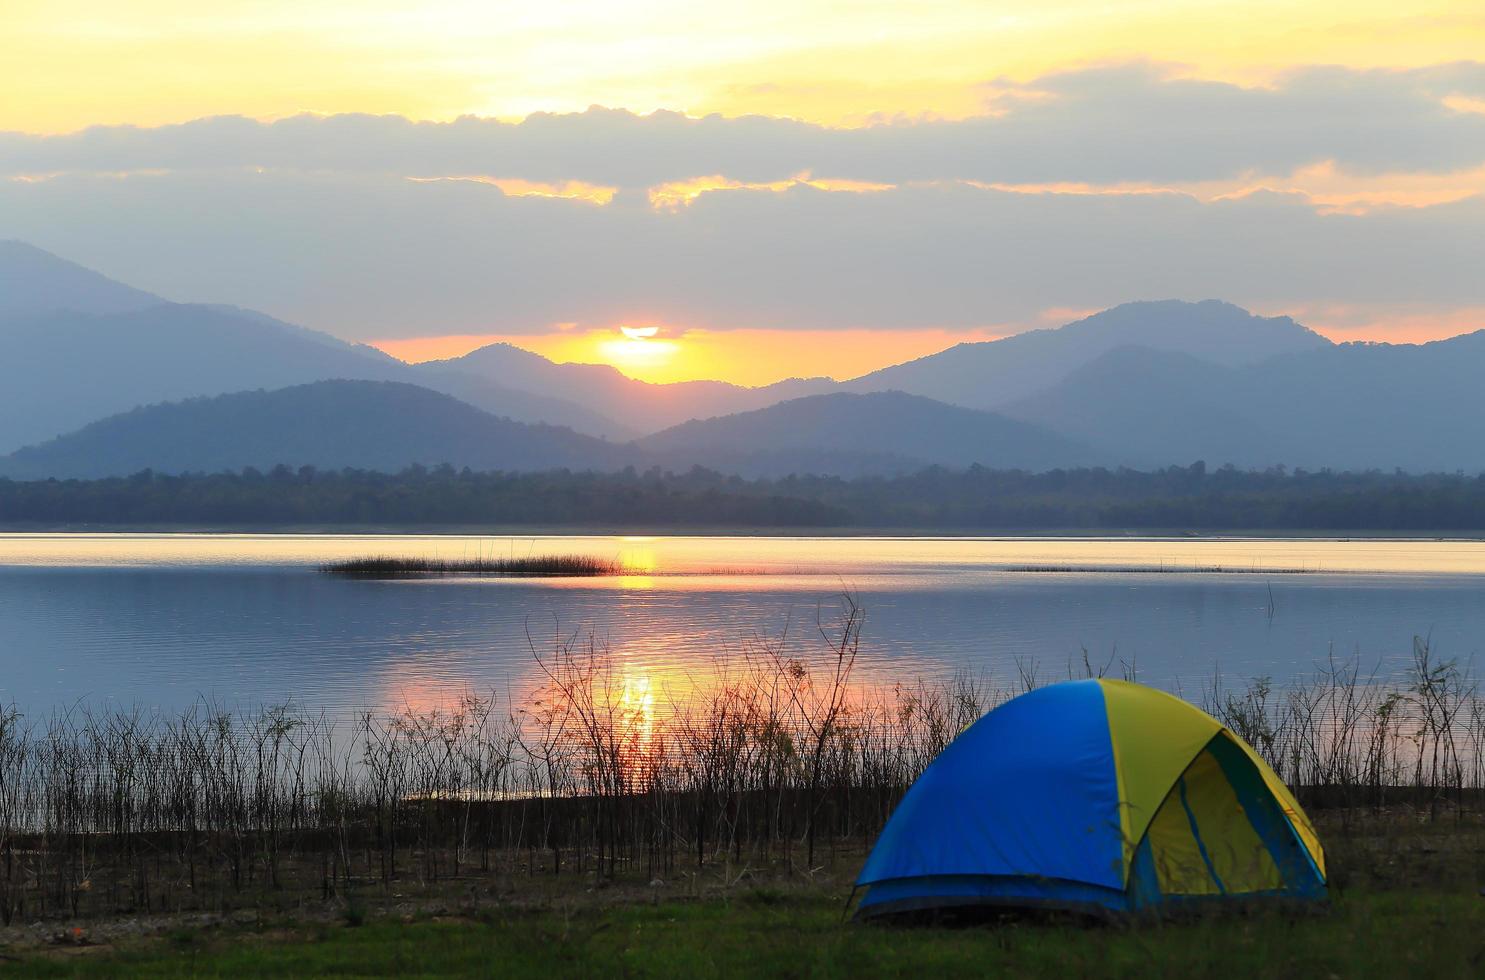 Campground beside the lake,National park,Thailand photo